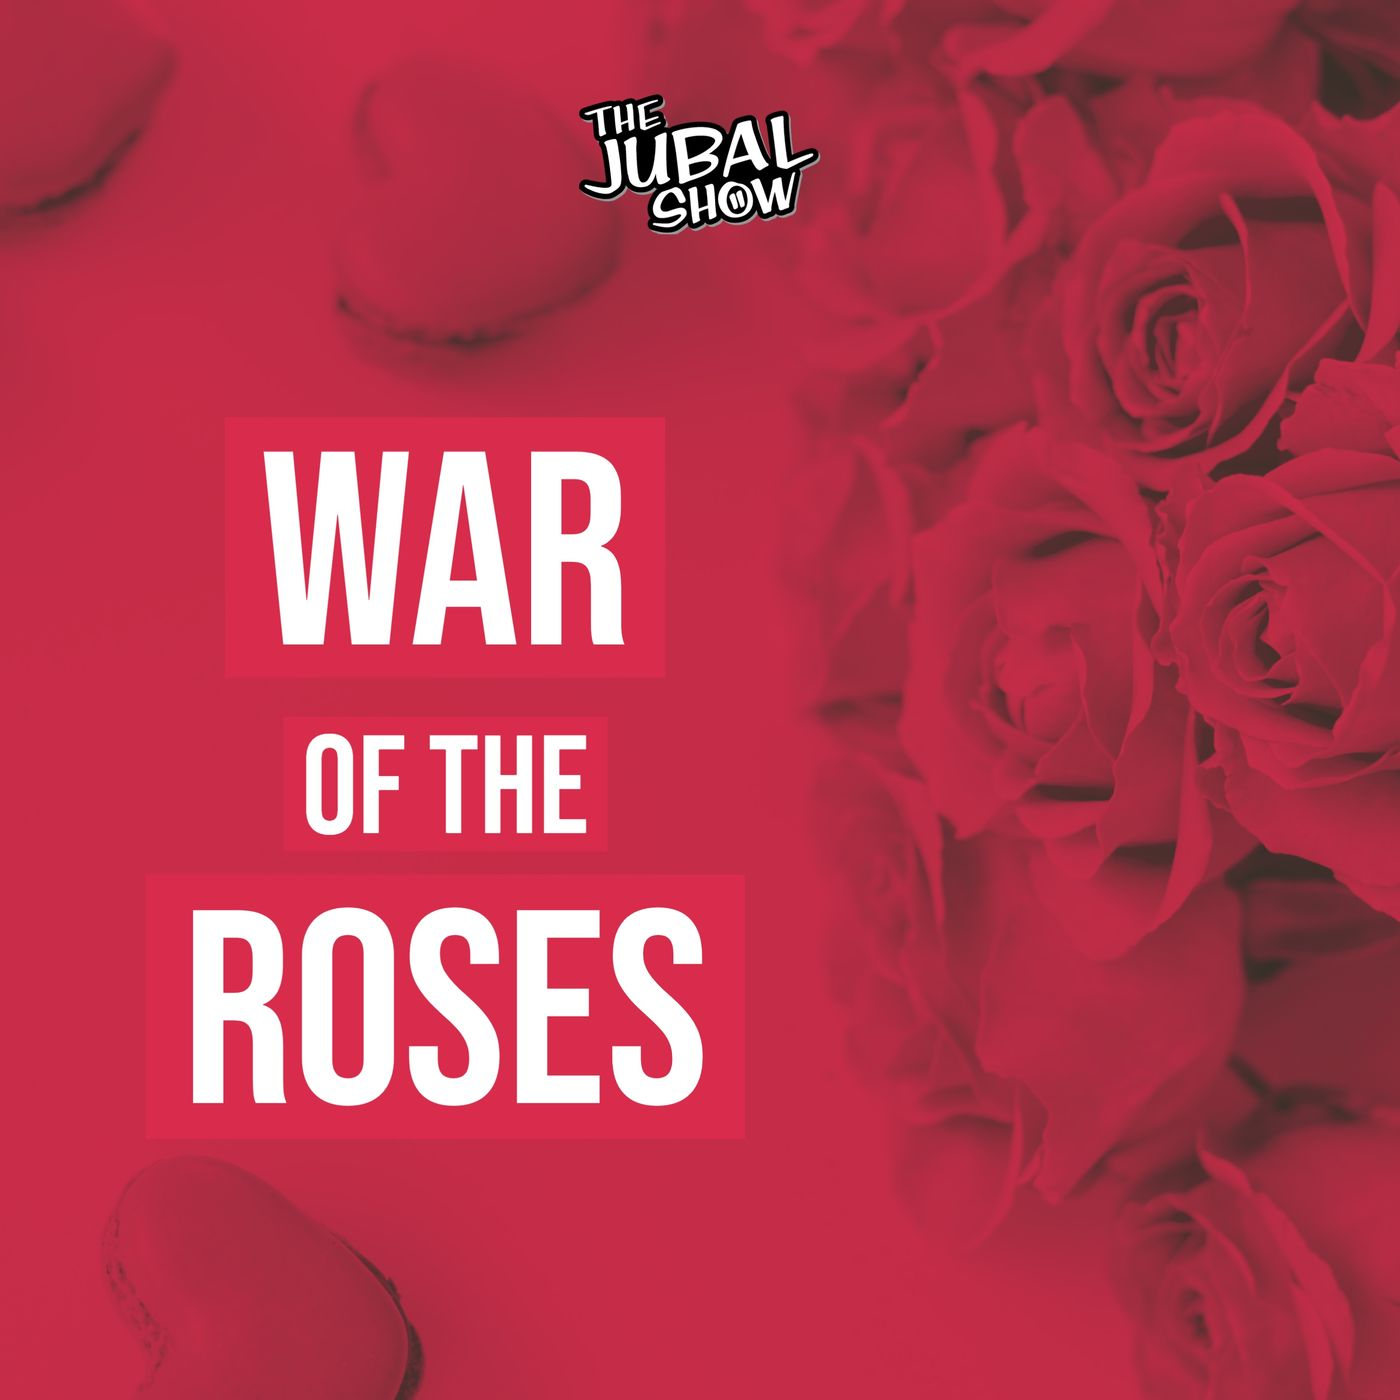 You'll never guess who told in this War of the Roses!